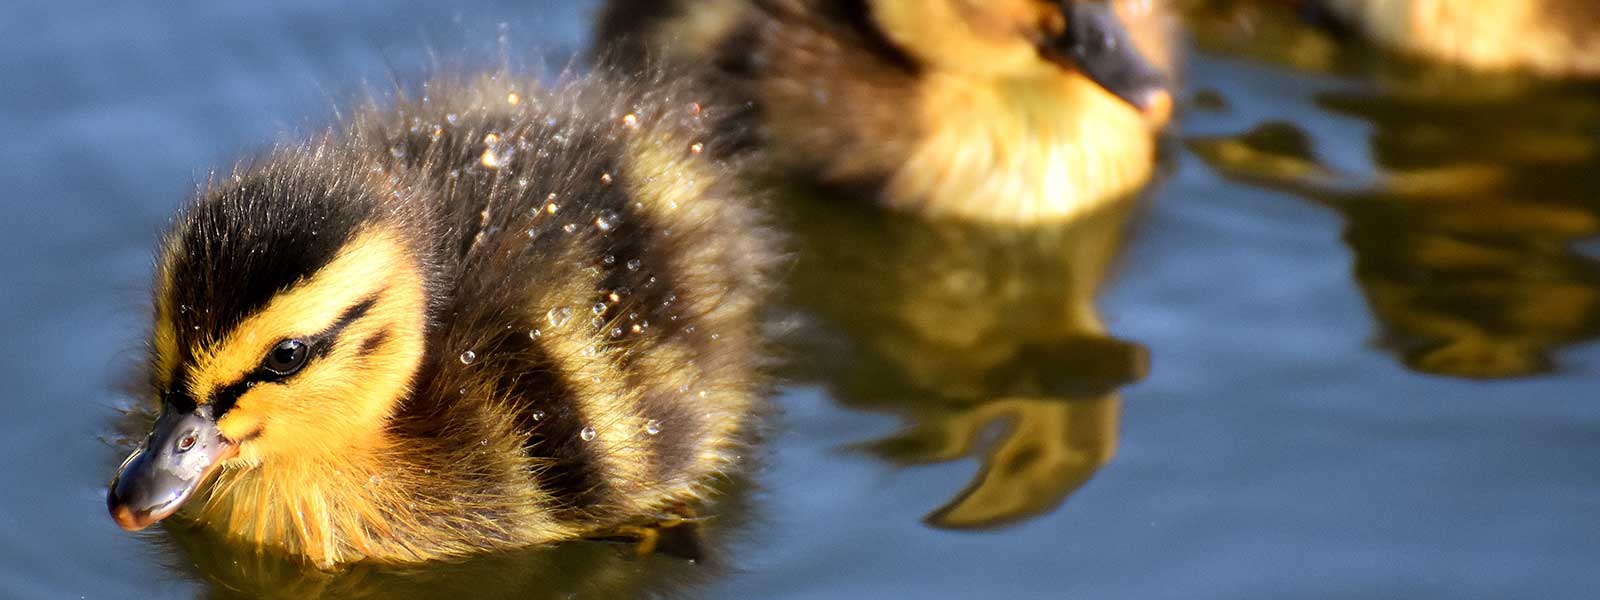 Duckling on water